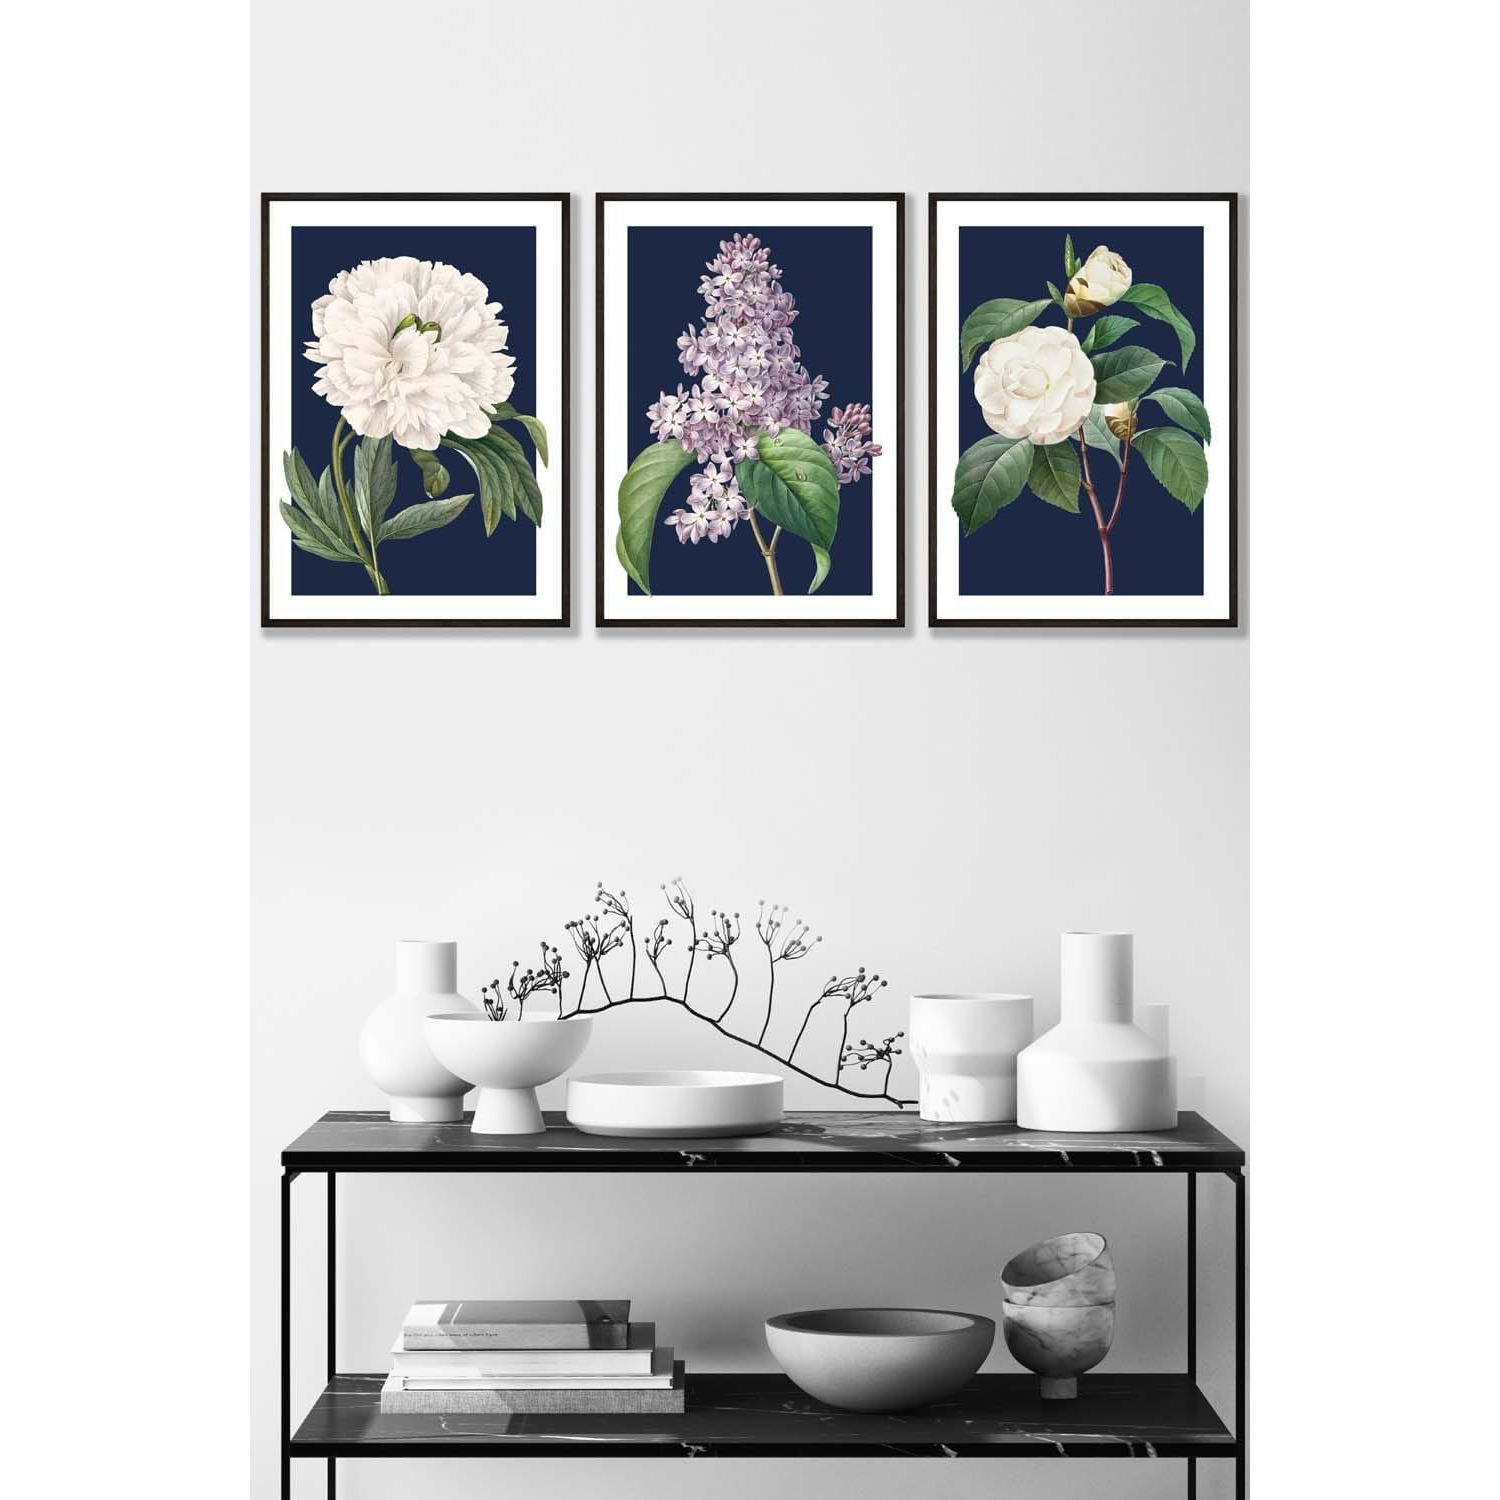 Set of 3 Black Framed Vintage Flowers Lilac, Peony and Camellia on Navy Blue Wall Art - image 1